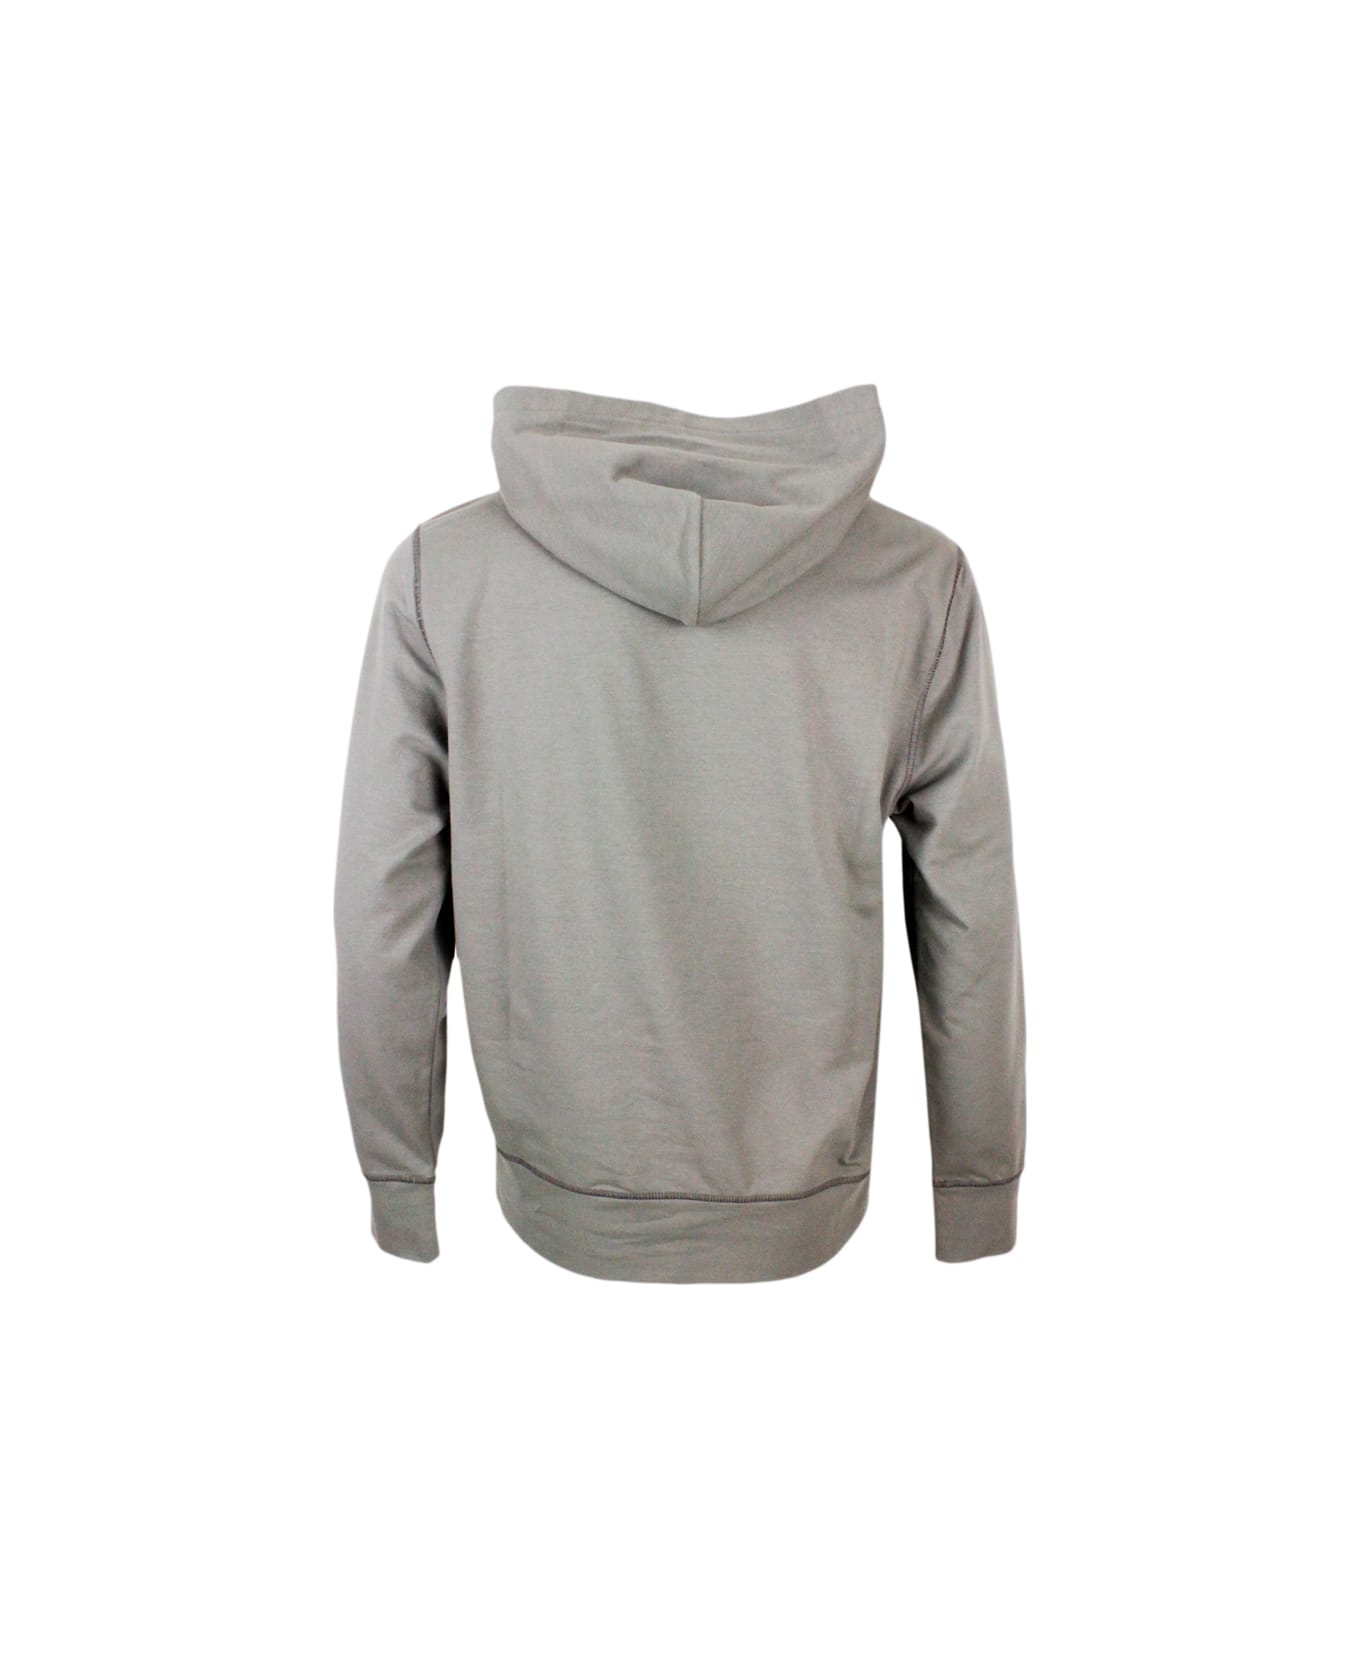 Kiton Hooded Sweatshirt In Soft And Fine Stretch Cotton With Long Sleeves - Beige - dove 